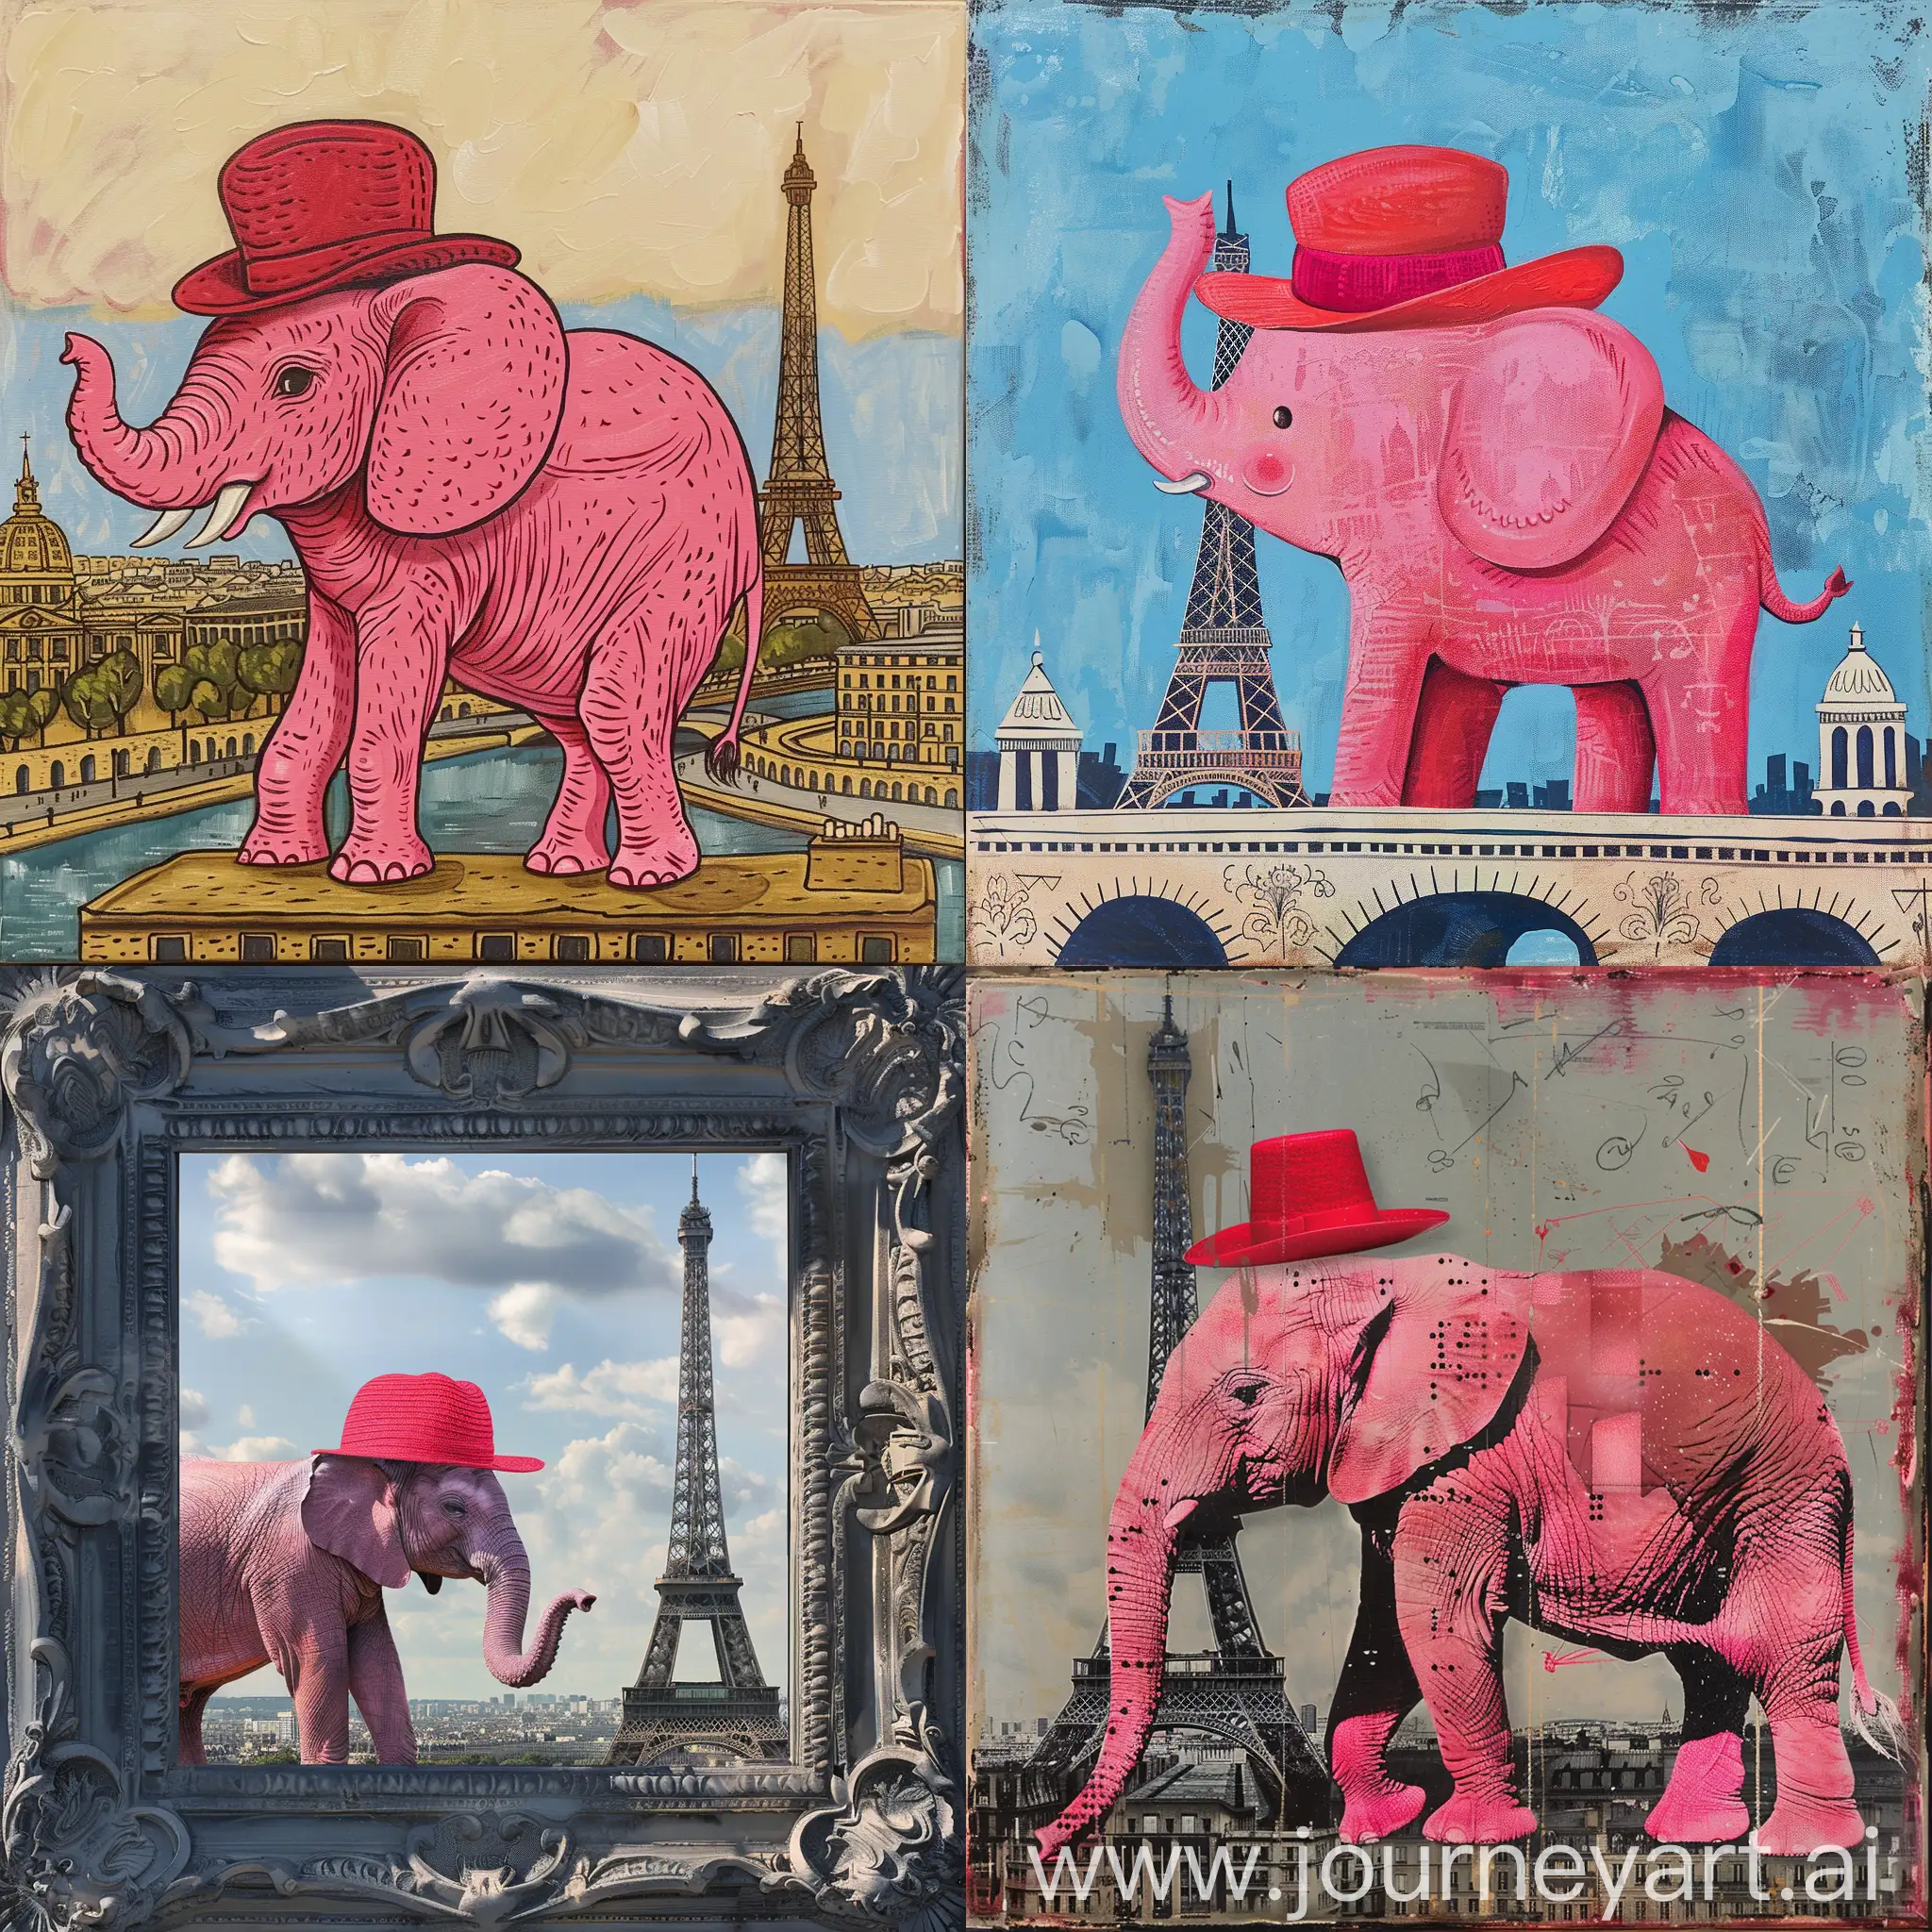 pink elephant on paris wich red hat
